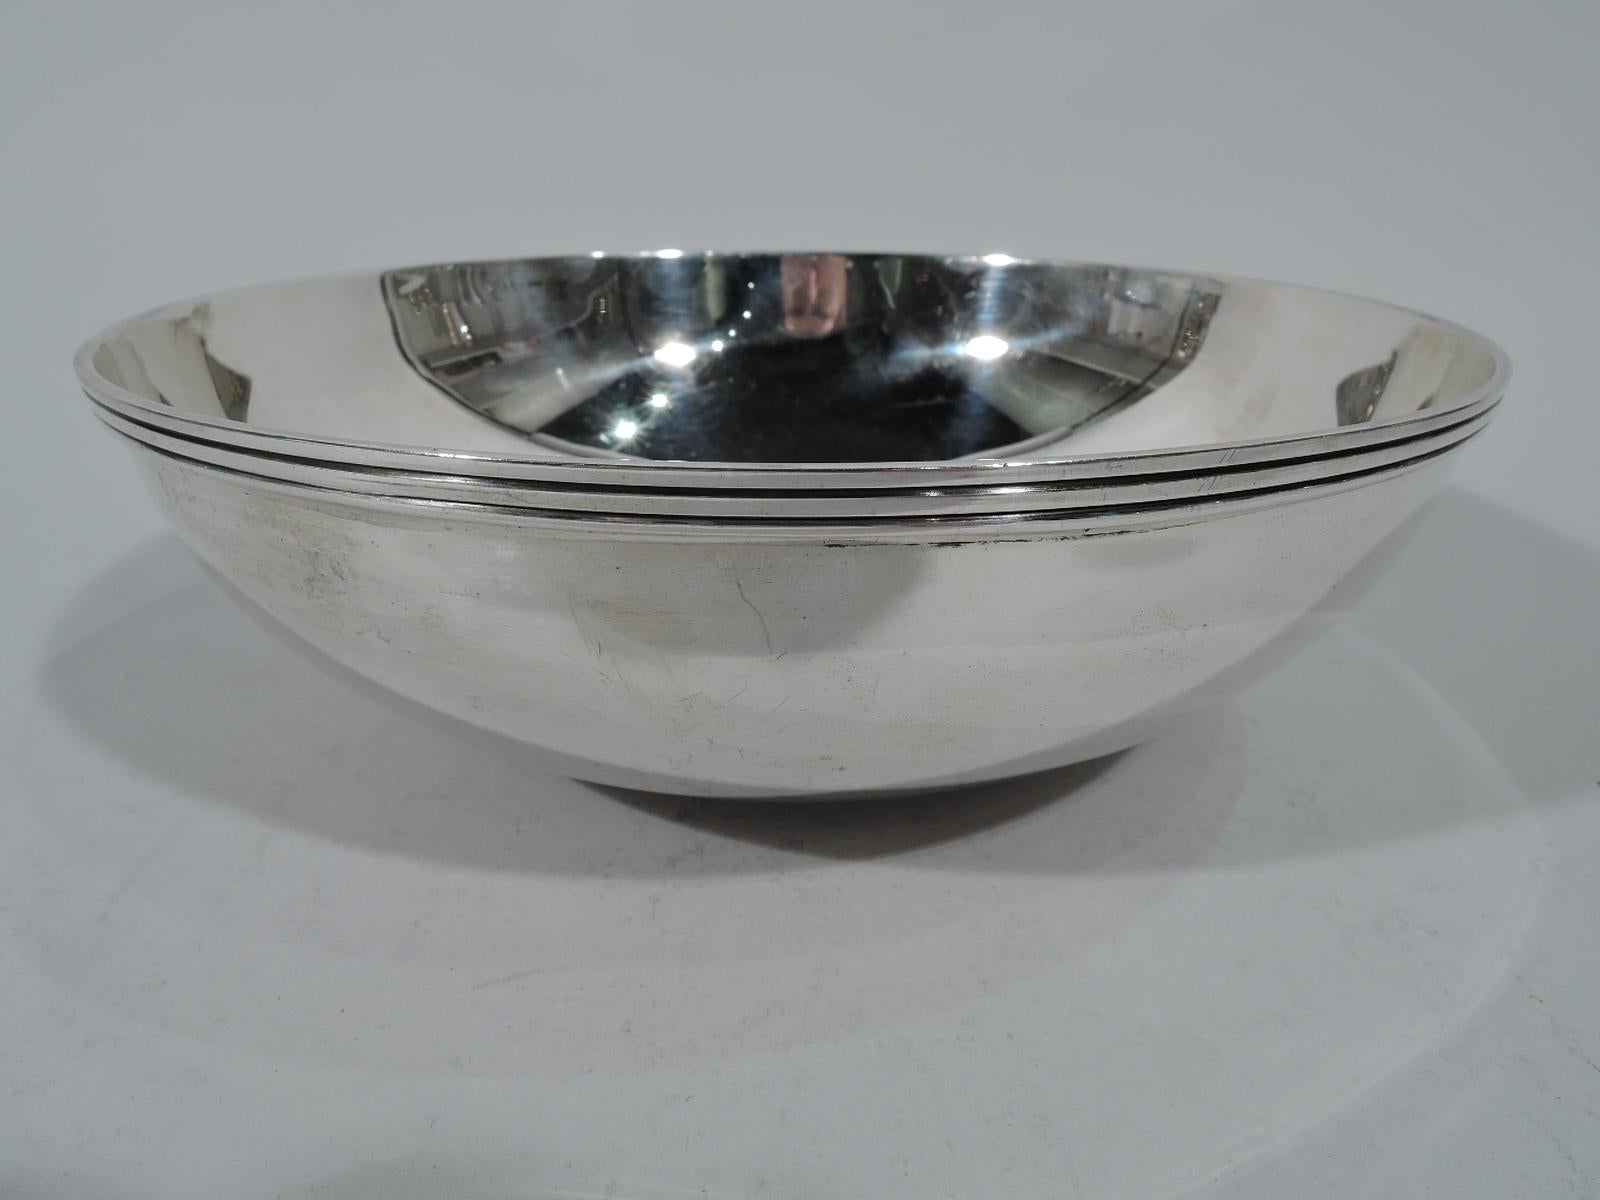 Mid-Century Modern sterling silver bowl. Made by Tiffany & Co. in New York. Circular well, curved sides, and reeded rim. Hallmark includes pattern no. 22843 and director’s letter M (1947-56). Measures: Weight 12.5 troy ounces.